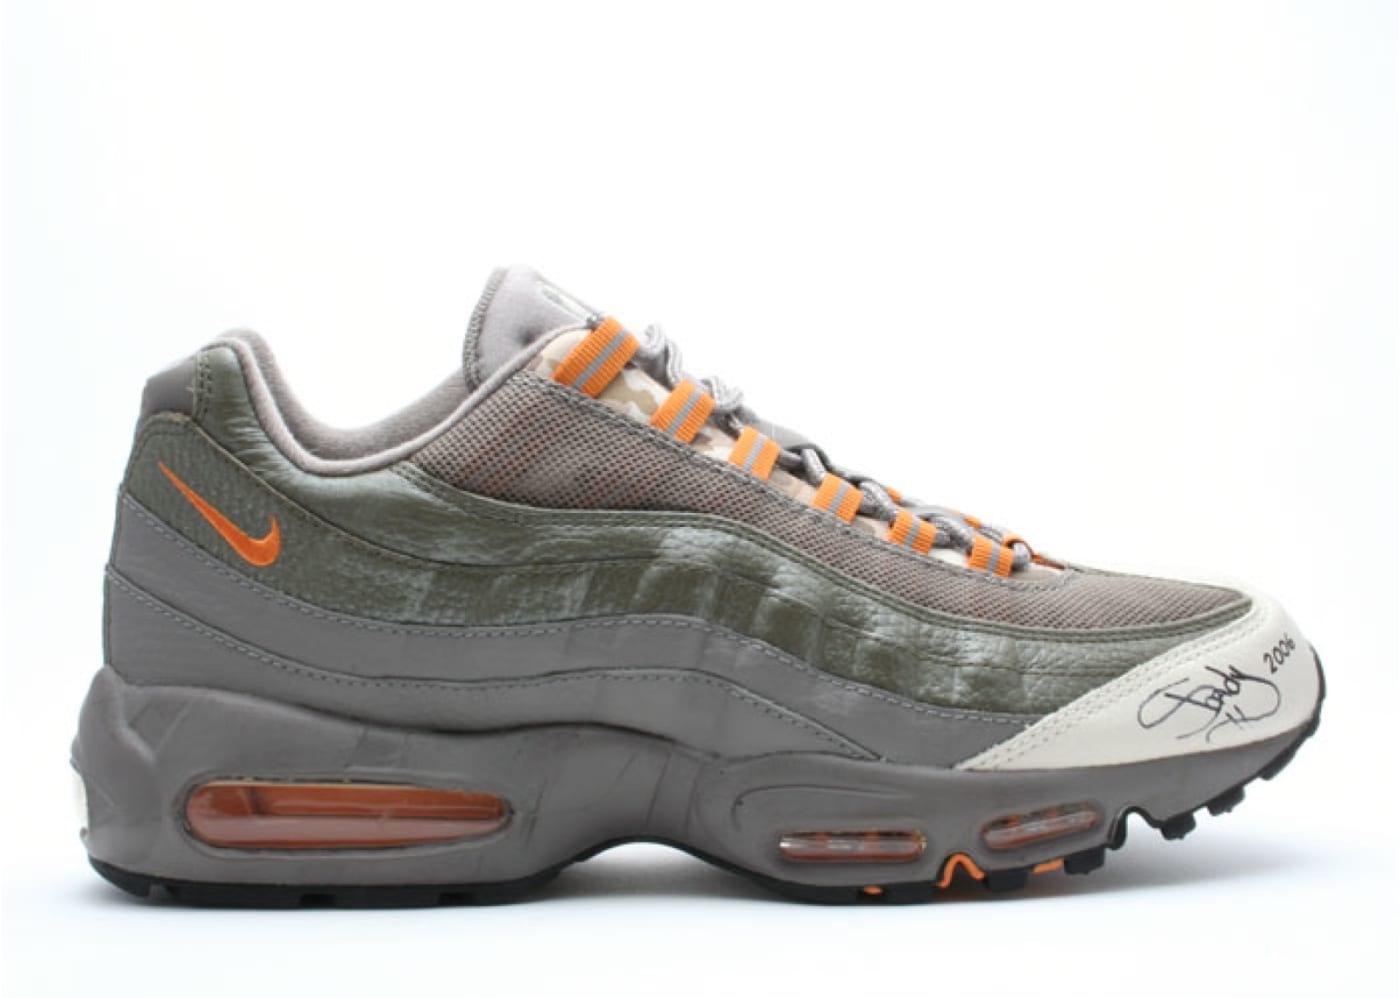 Nike Air Max 95: 20 Things You About the Sneaker Complex